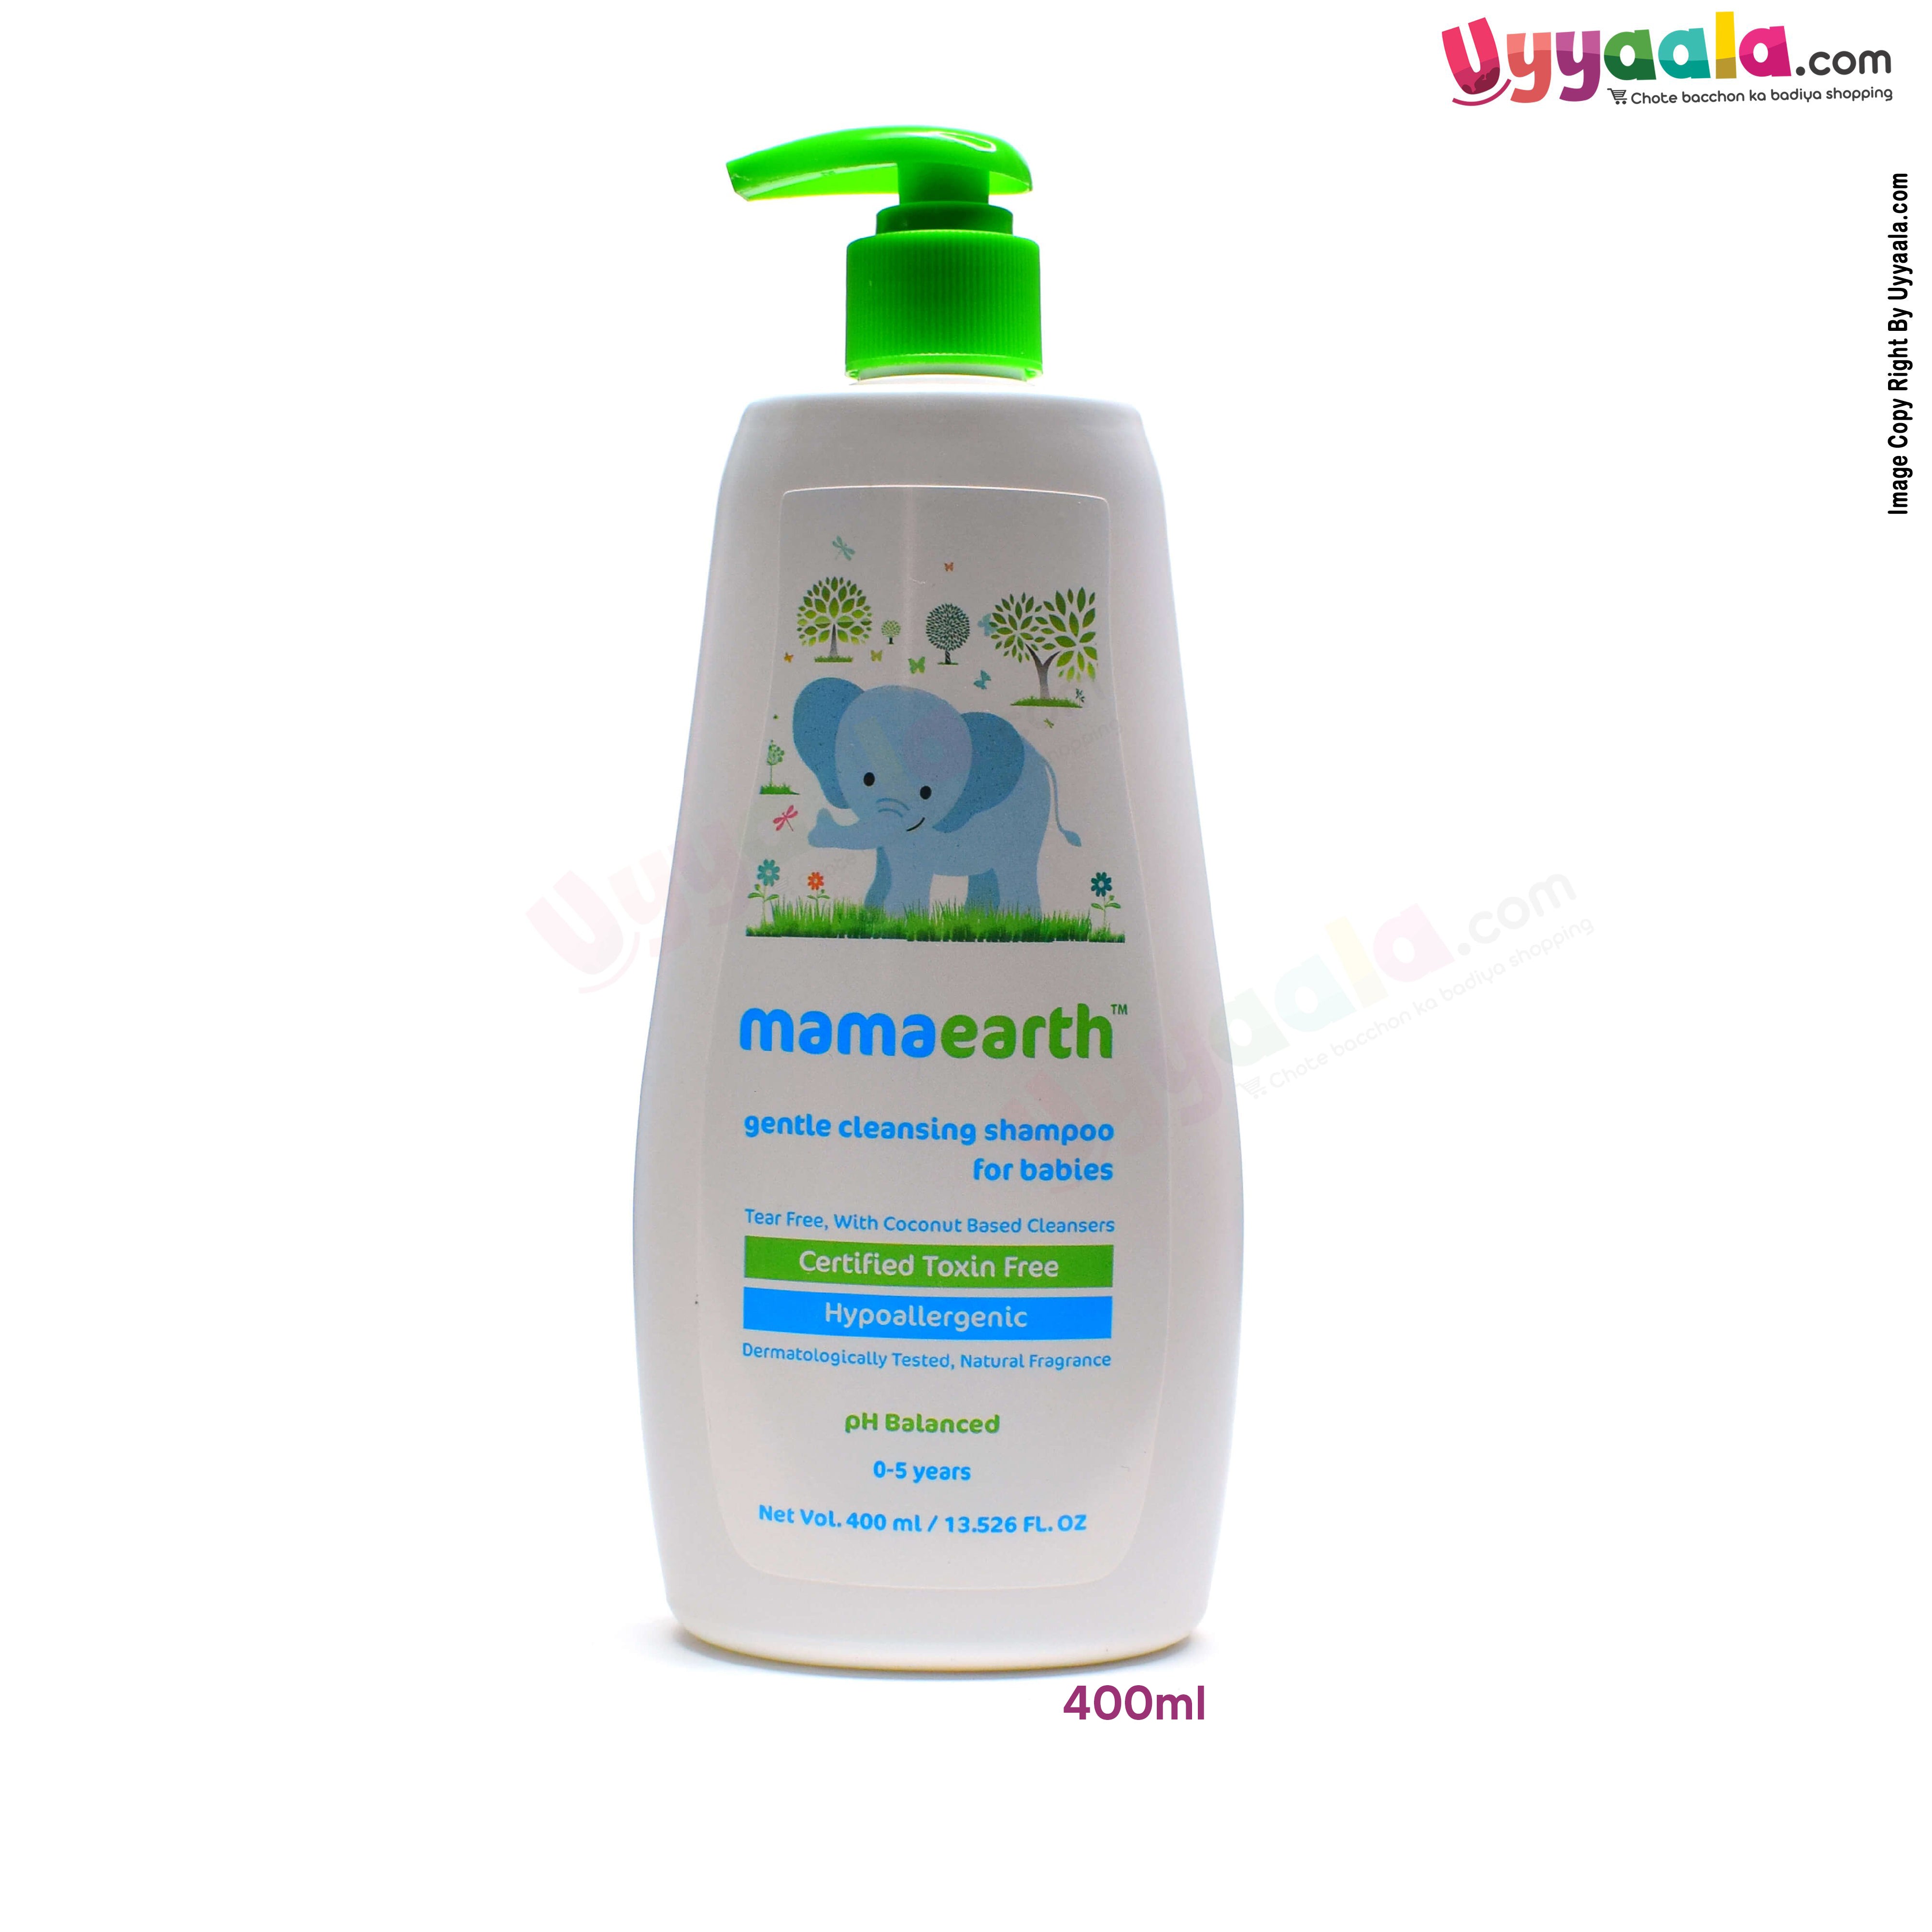 MAMAEARTH Gentle Cleansing Shampoo